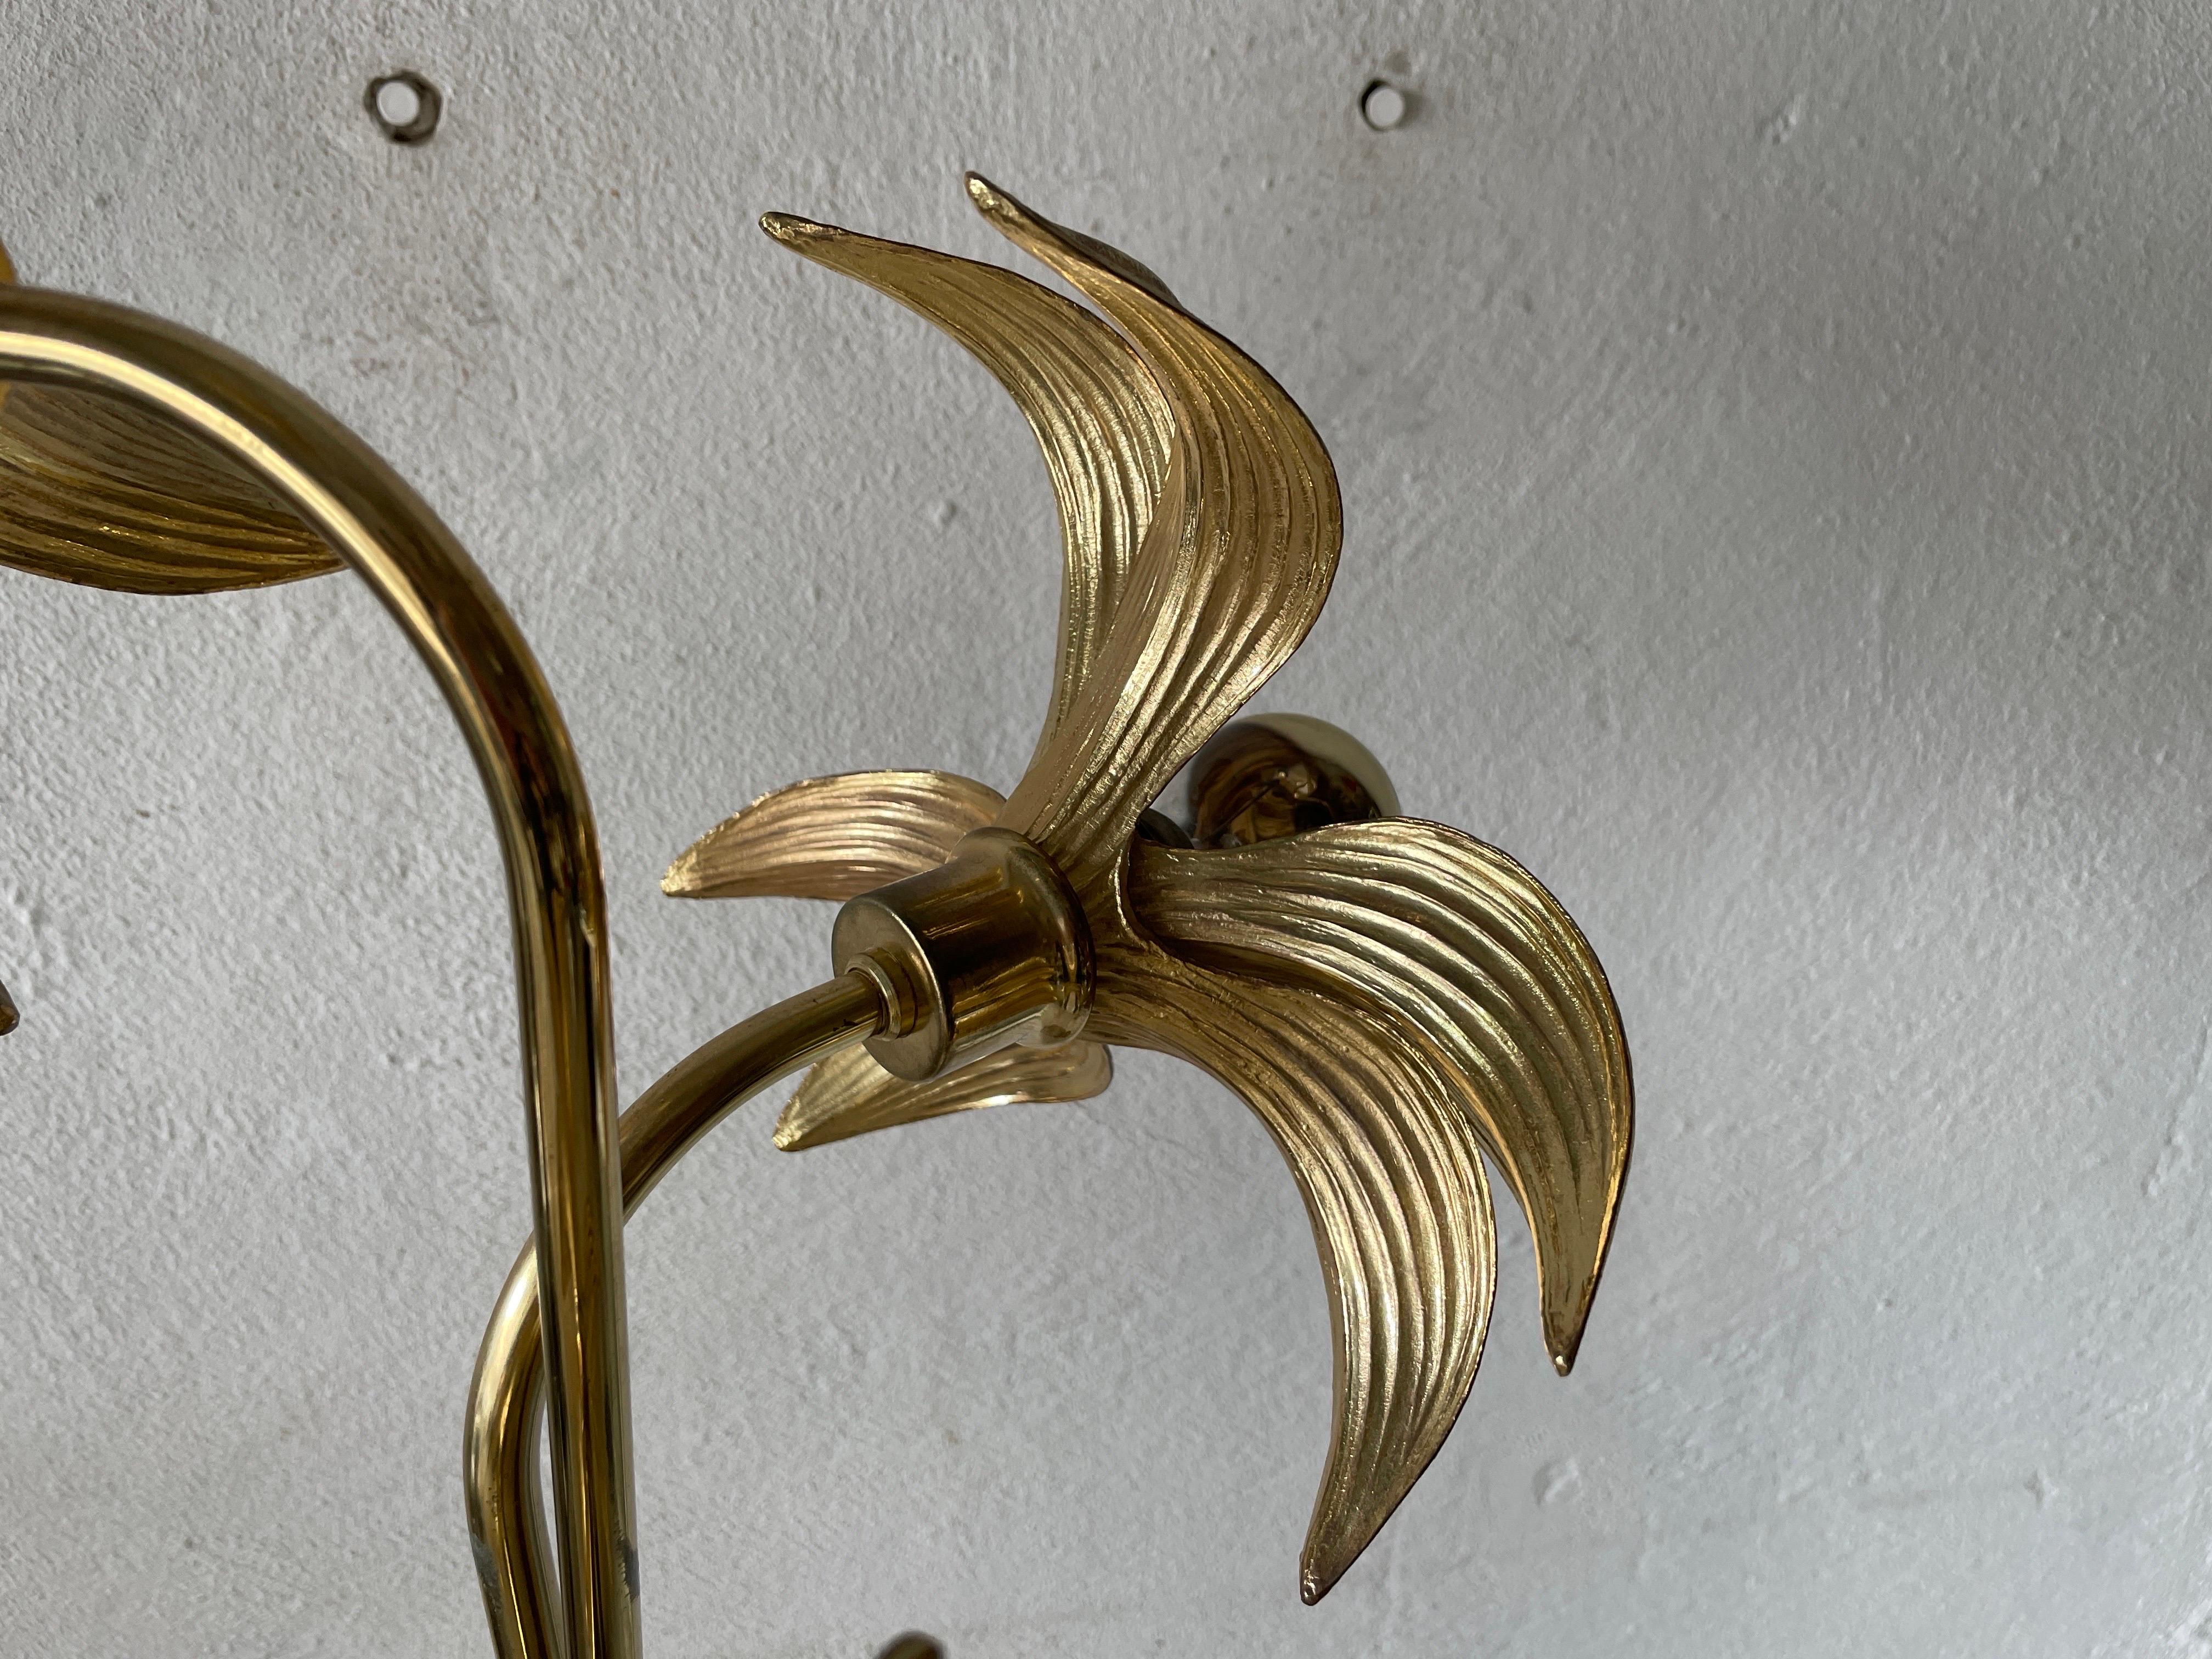 Late 20th Century Triple Flower Shade Brass Floor Lamp by Willy Daro for Massive, 1970s, Germany For Sale